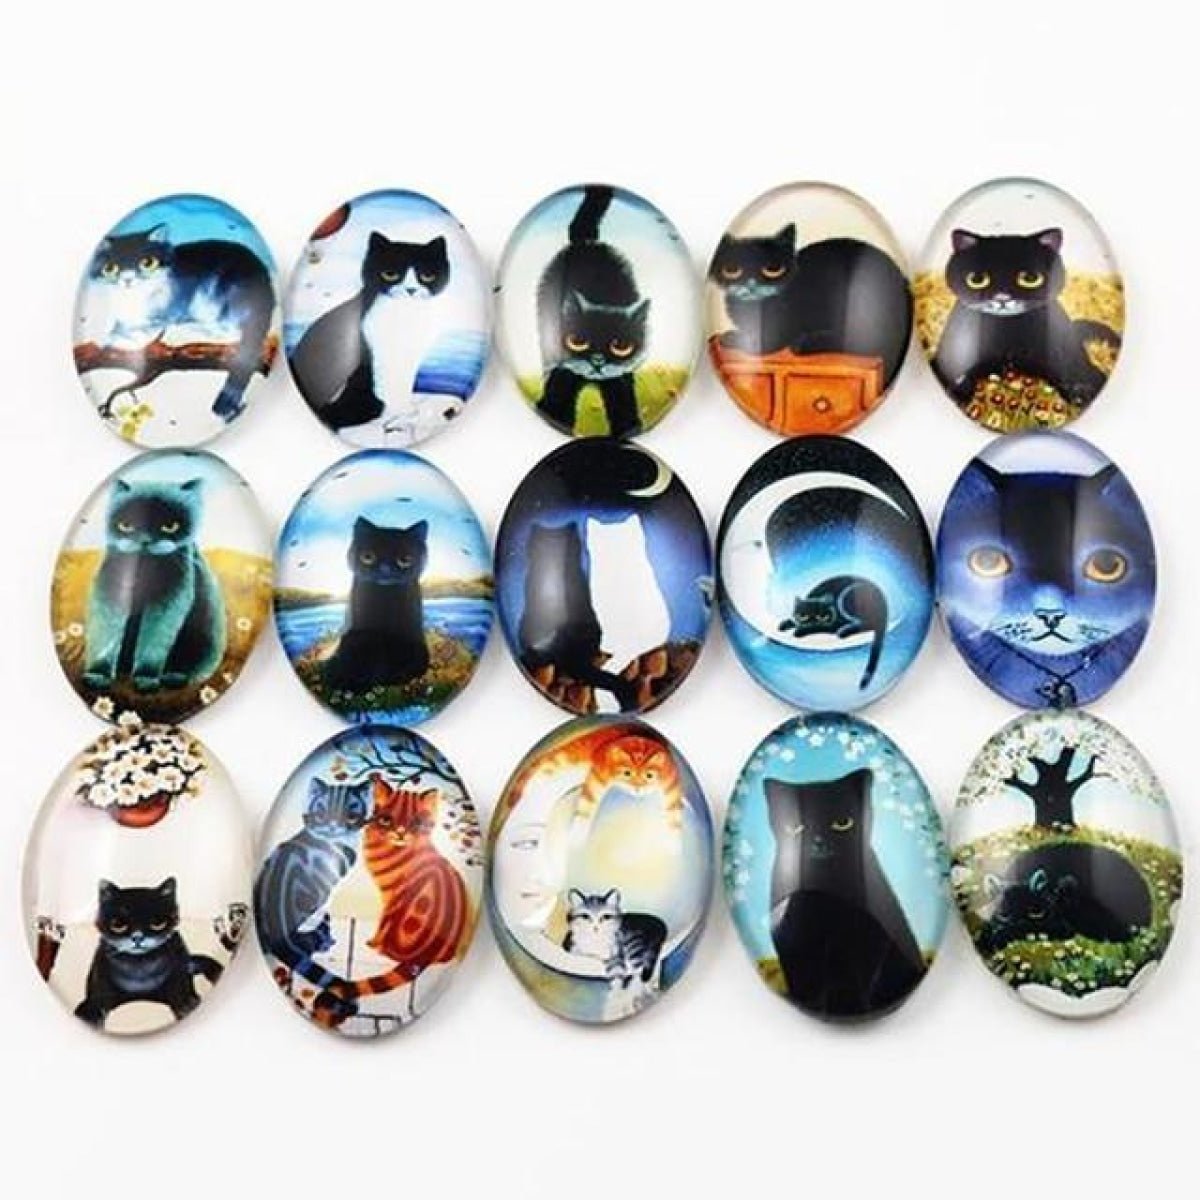 10pcs Glass Cabochons Flower Tree Life Handmade Oval Shape 18x25mm Jewellery Accessories - CATS - - Asia Sell